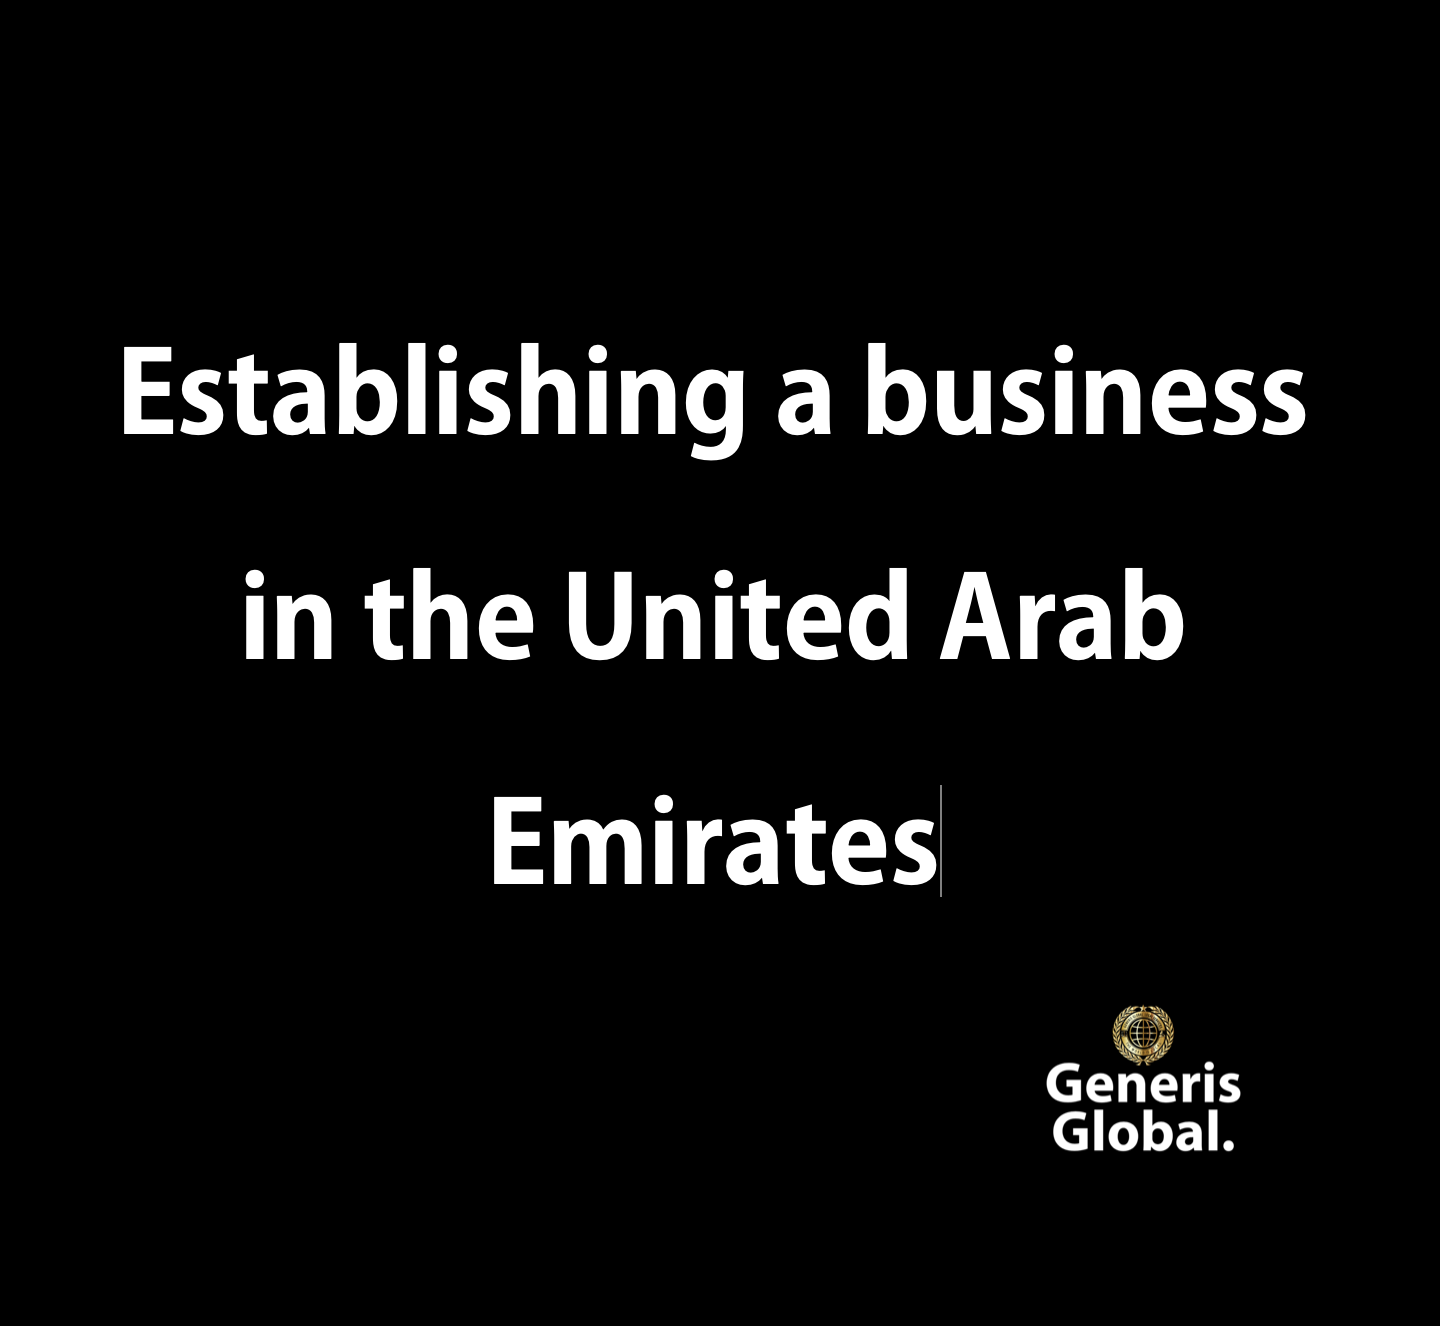 Because you are entering a foreign market, there are just a few fundamental expenses associated with establishing a business in the United Arab Emirates